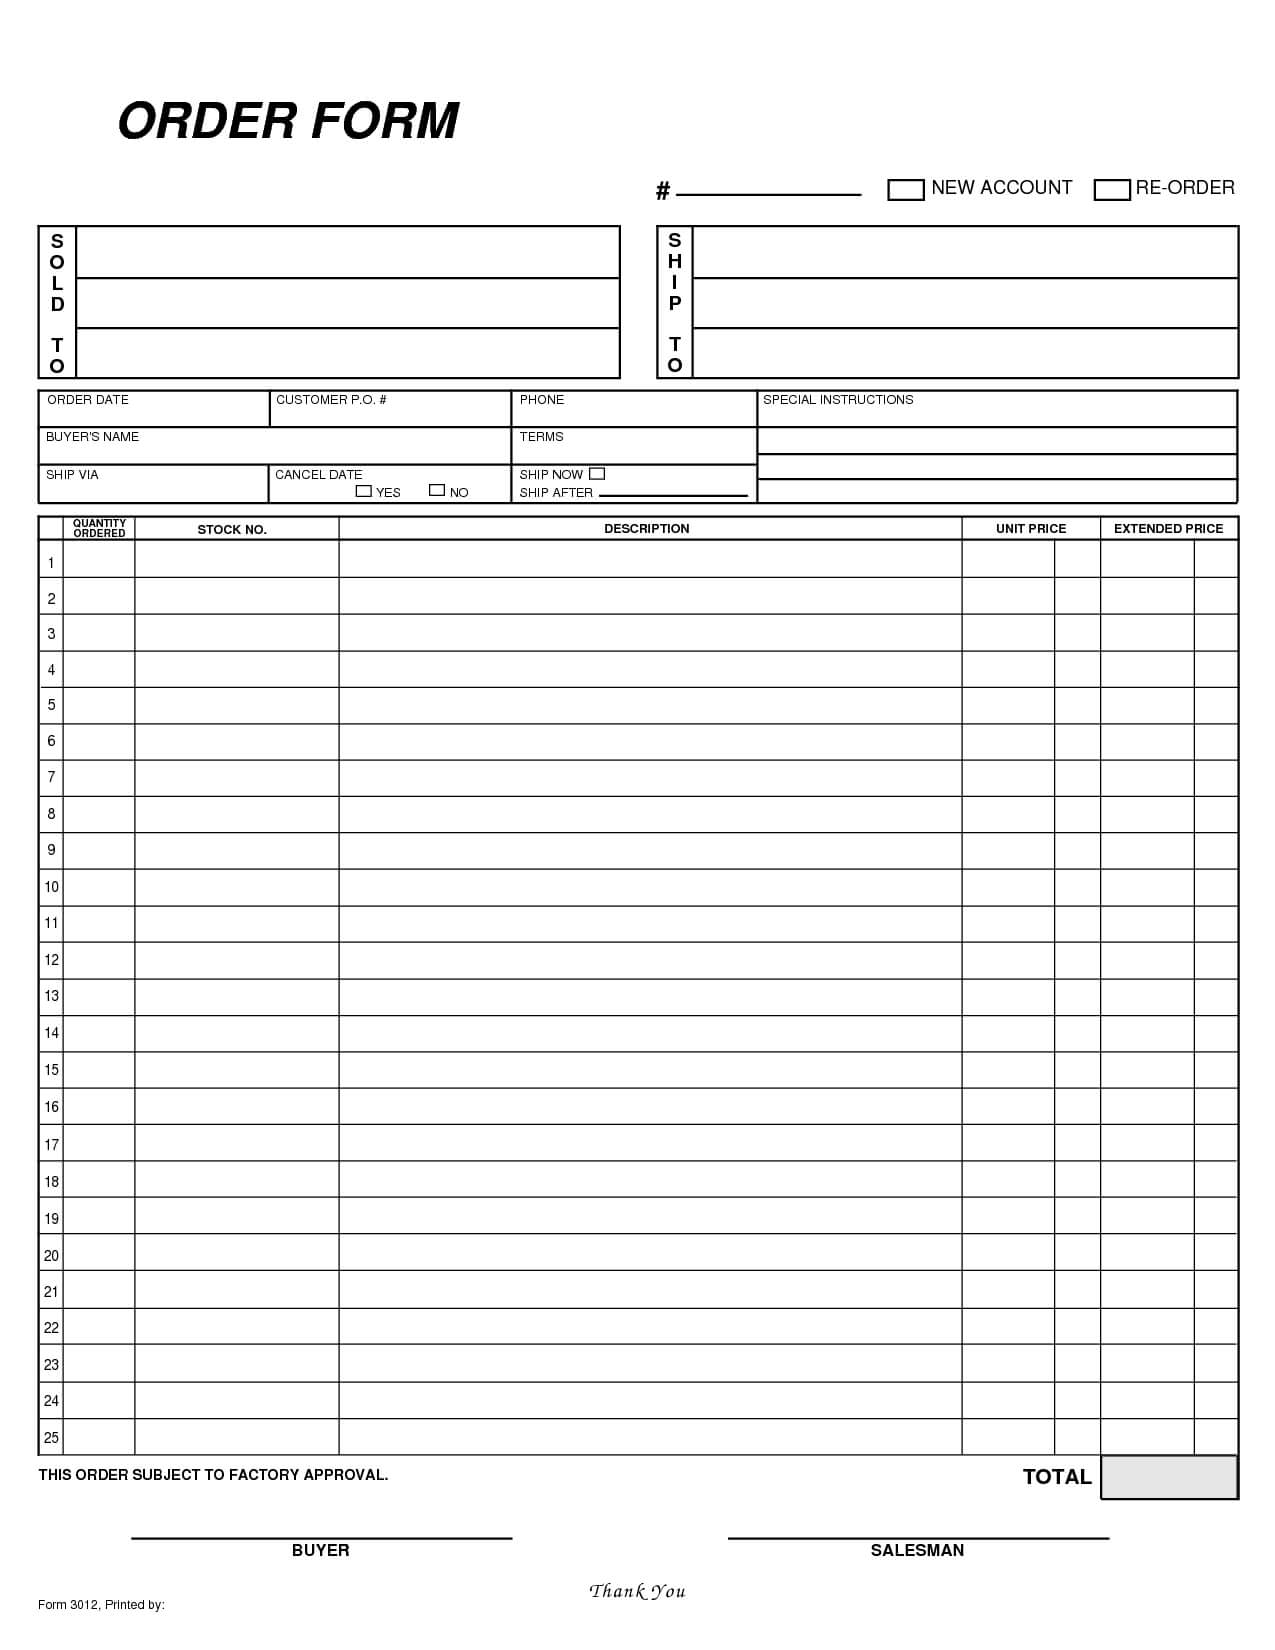 Blank Order Form Template Excel – Ironi.celikdemirsan For Blank T Shirt Order Form Template